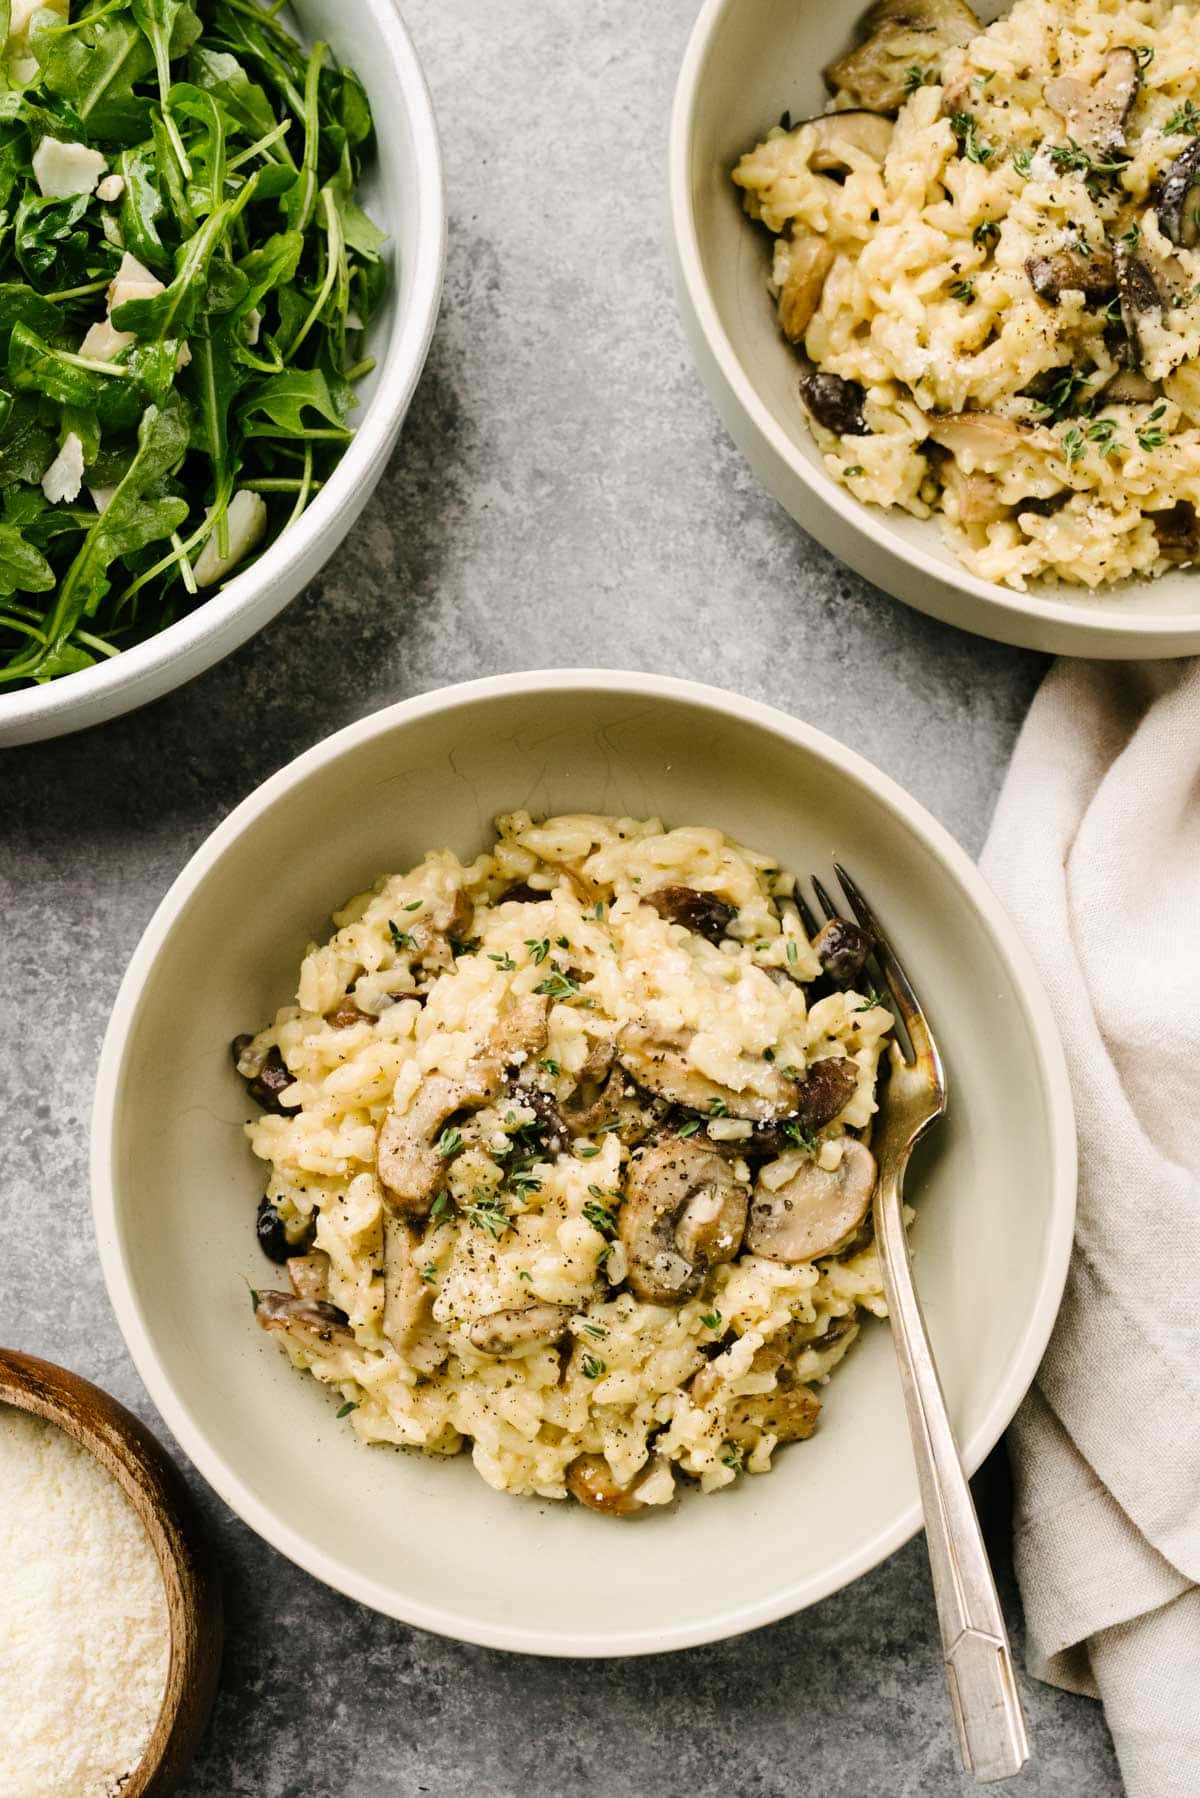 Two bowls of Instant Pot mushroom risotto on a concrete background. An arugula salad, small bowl of grated parmesan cheese, and cream linen napkin surround the bowls.